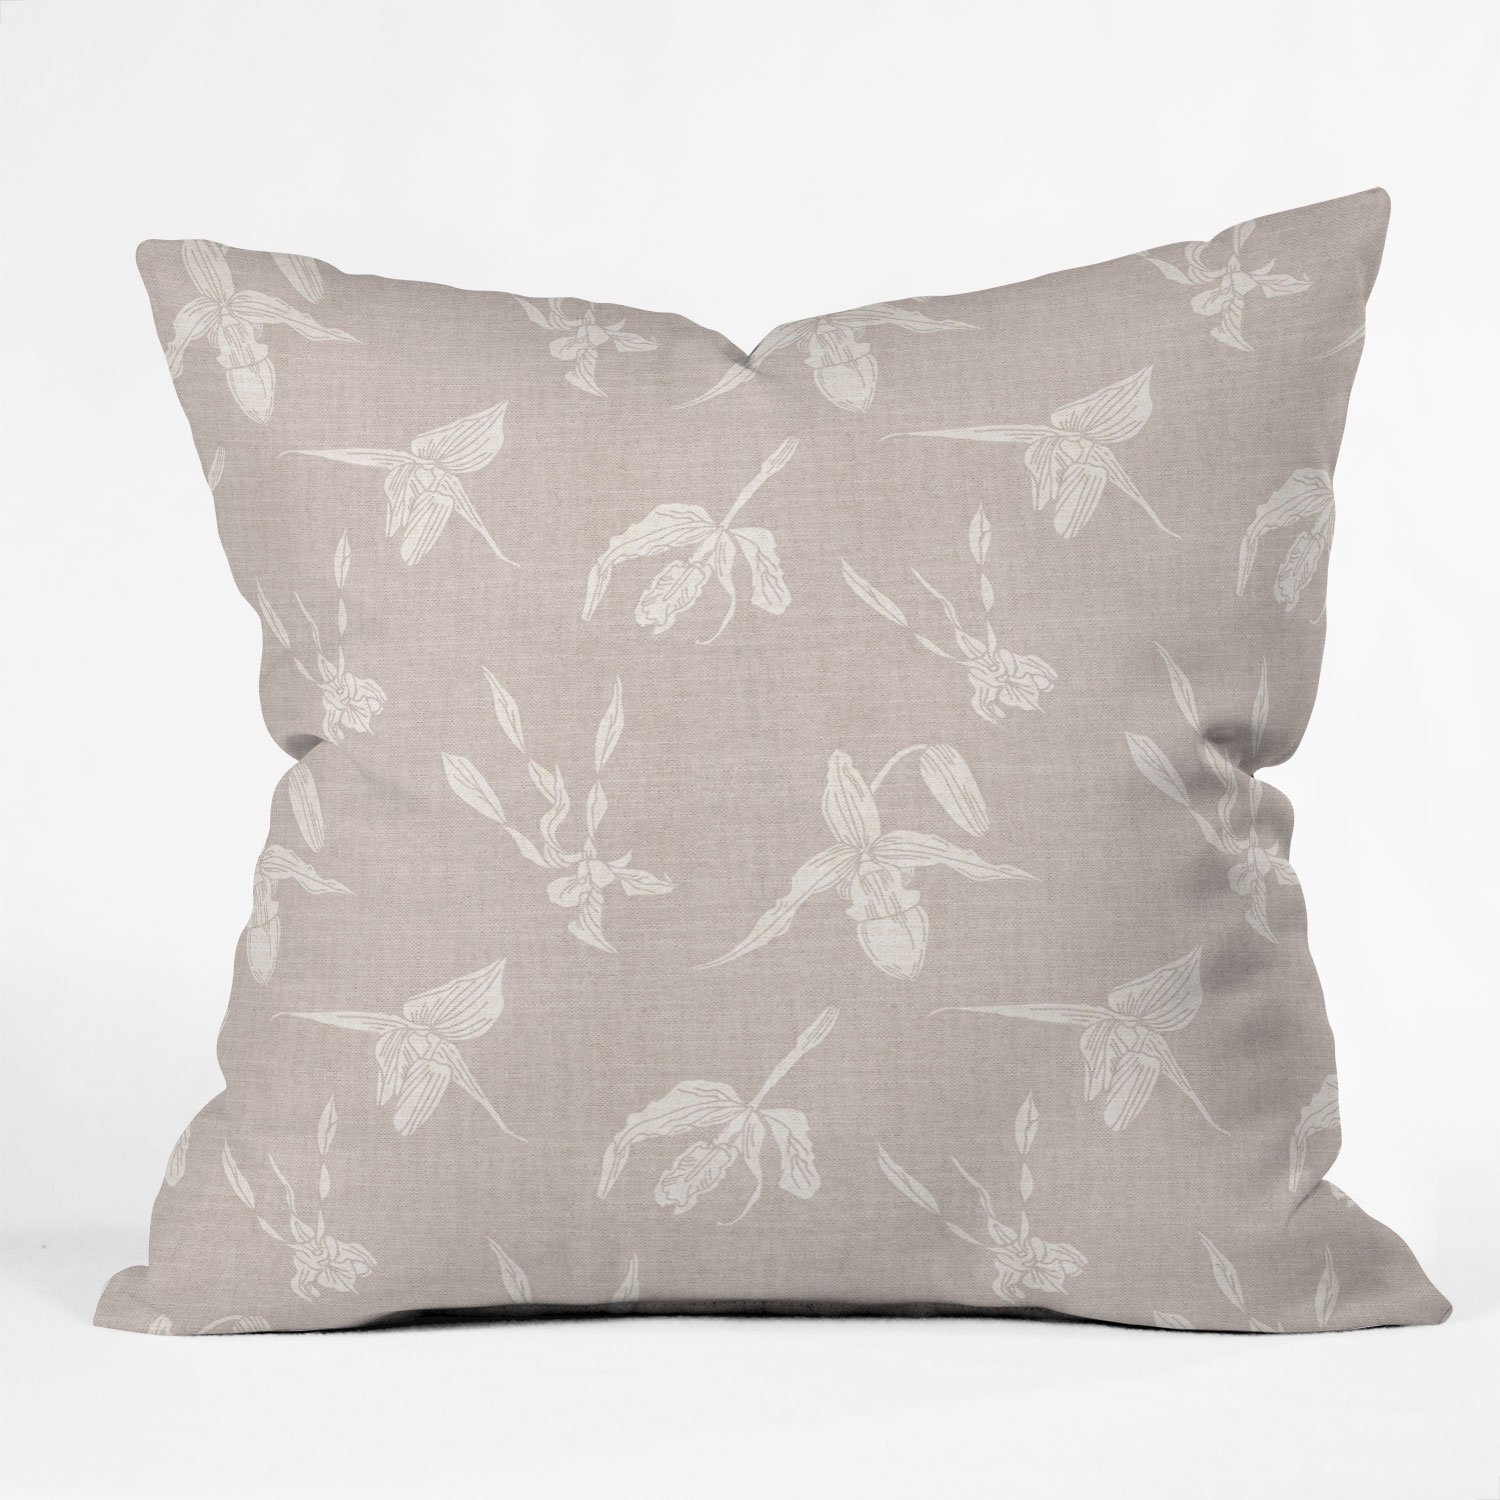 ORCHID LINEN Throw Pillow - 18" x 18"" - Polyester Insert - Image 0